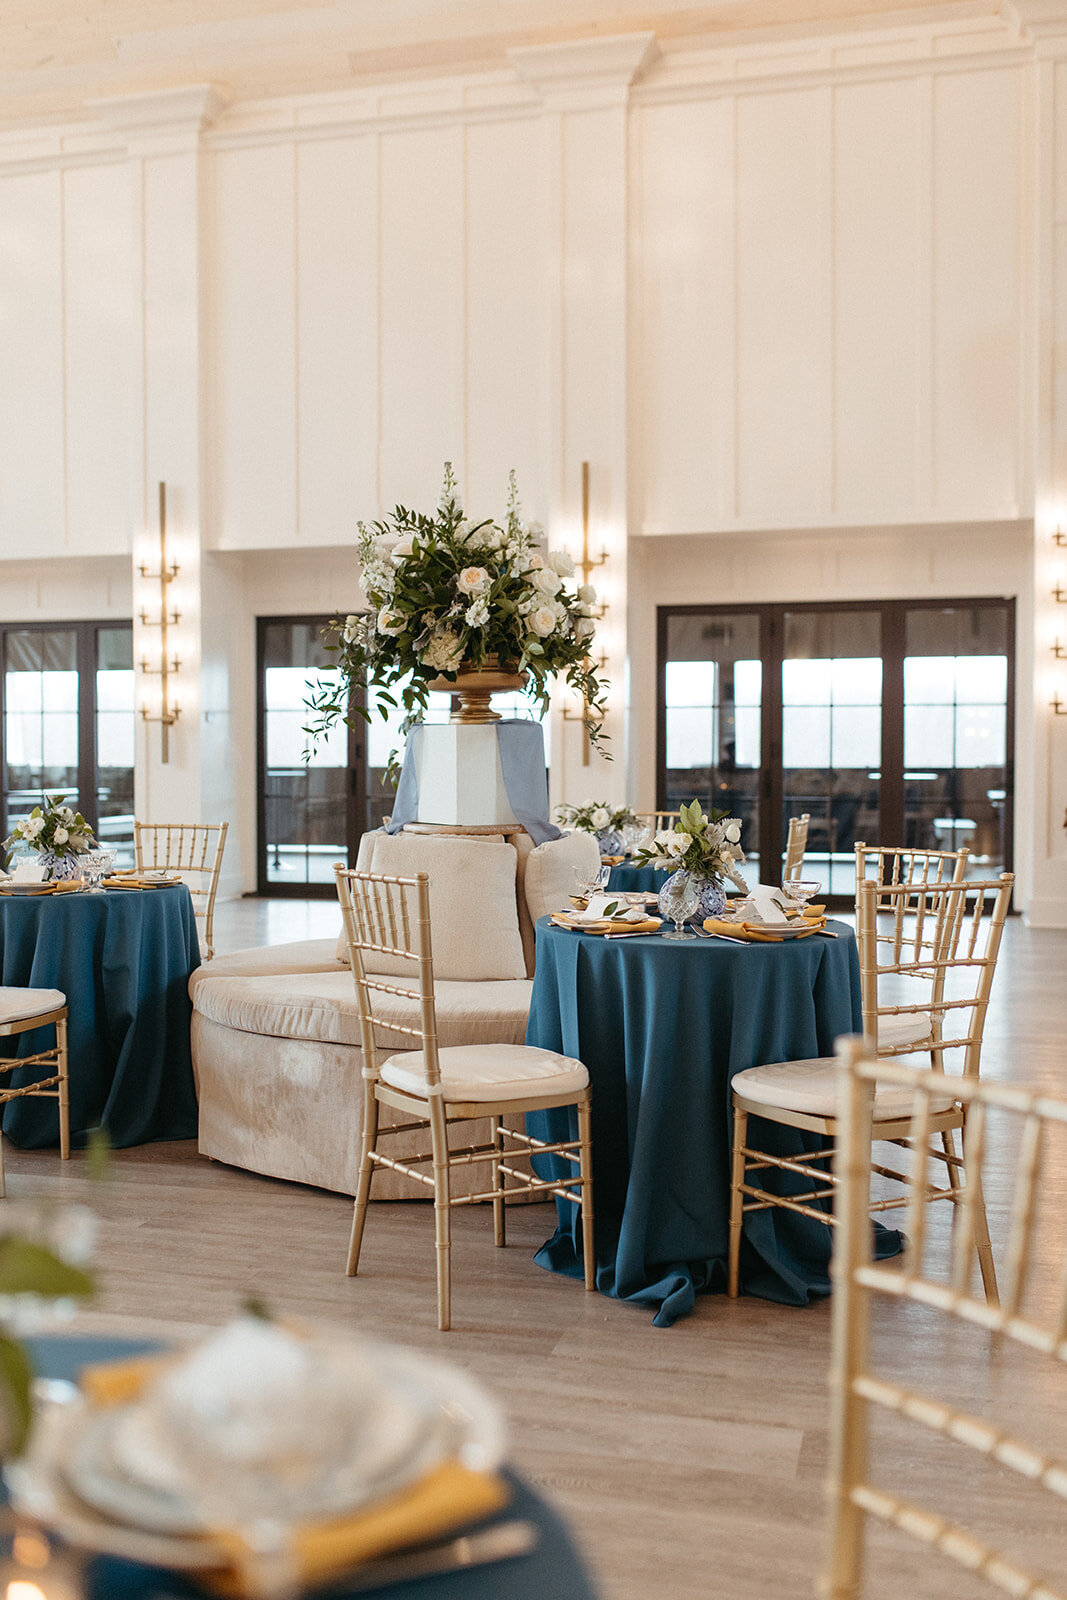 A bright and airy banquet room with blue satin linens on round tables, gold chairs and white floral arrangements.